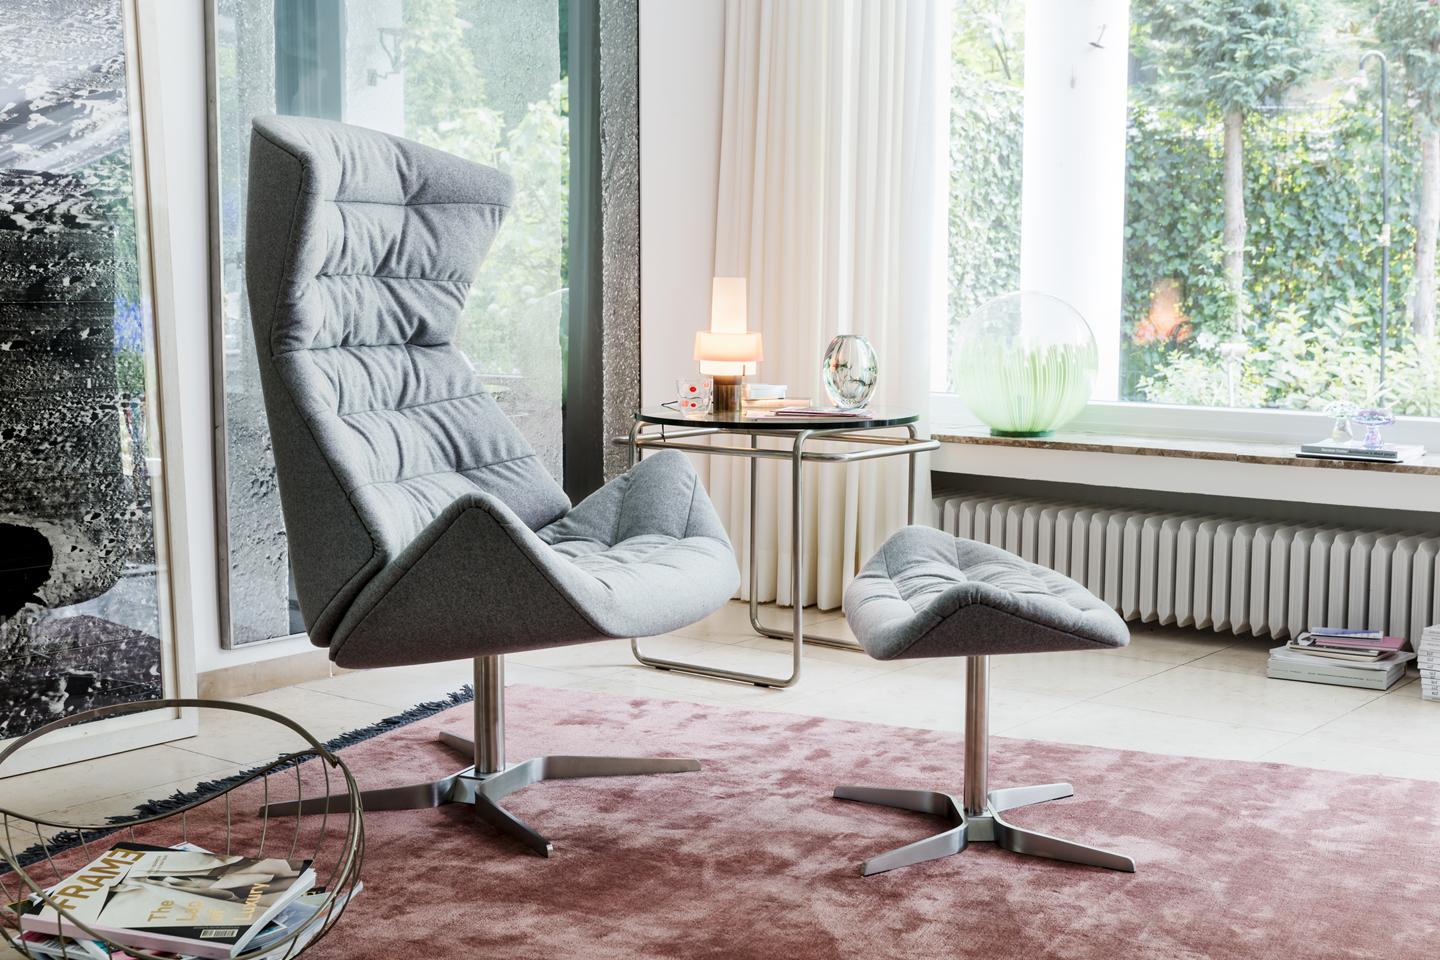 RANGE 808
With the range 808, Munich based design studio Formstelle has created a lounge chair that combines maximum comfort with numerous possibilities for individualization. The lounge chair 808 plays with the contrast between a protective shell